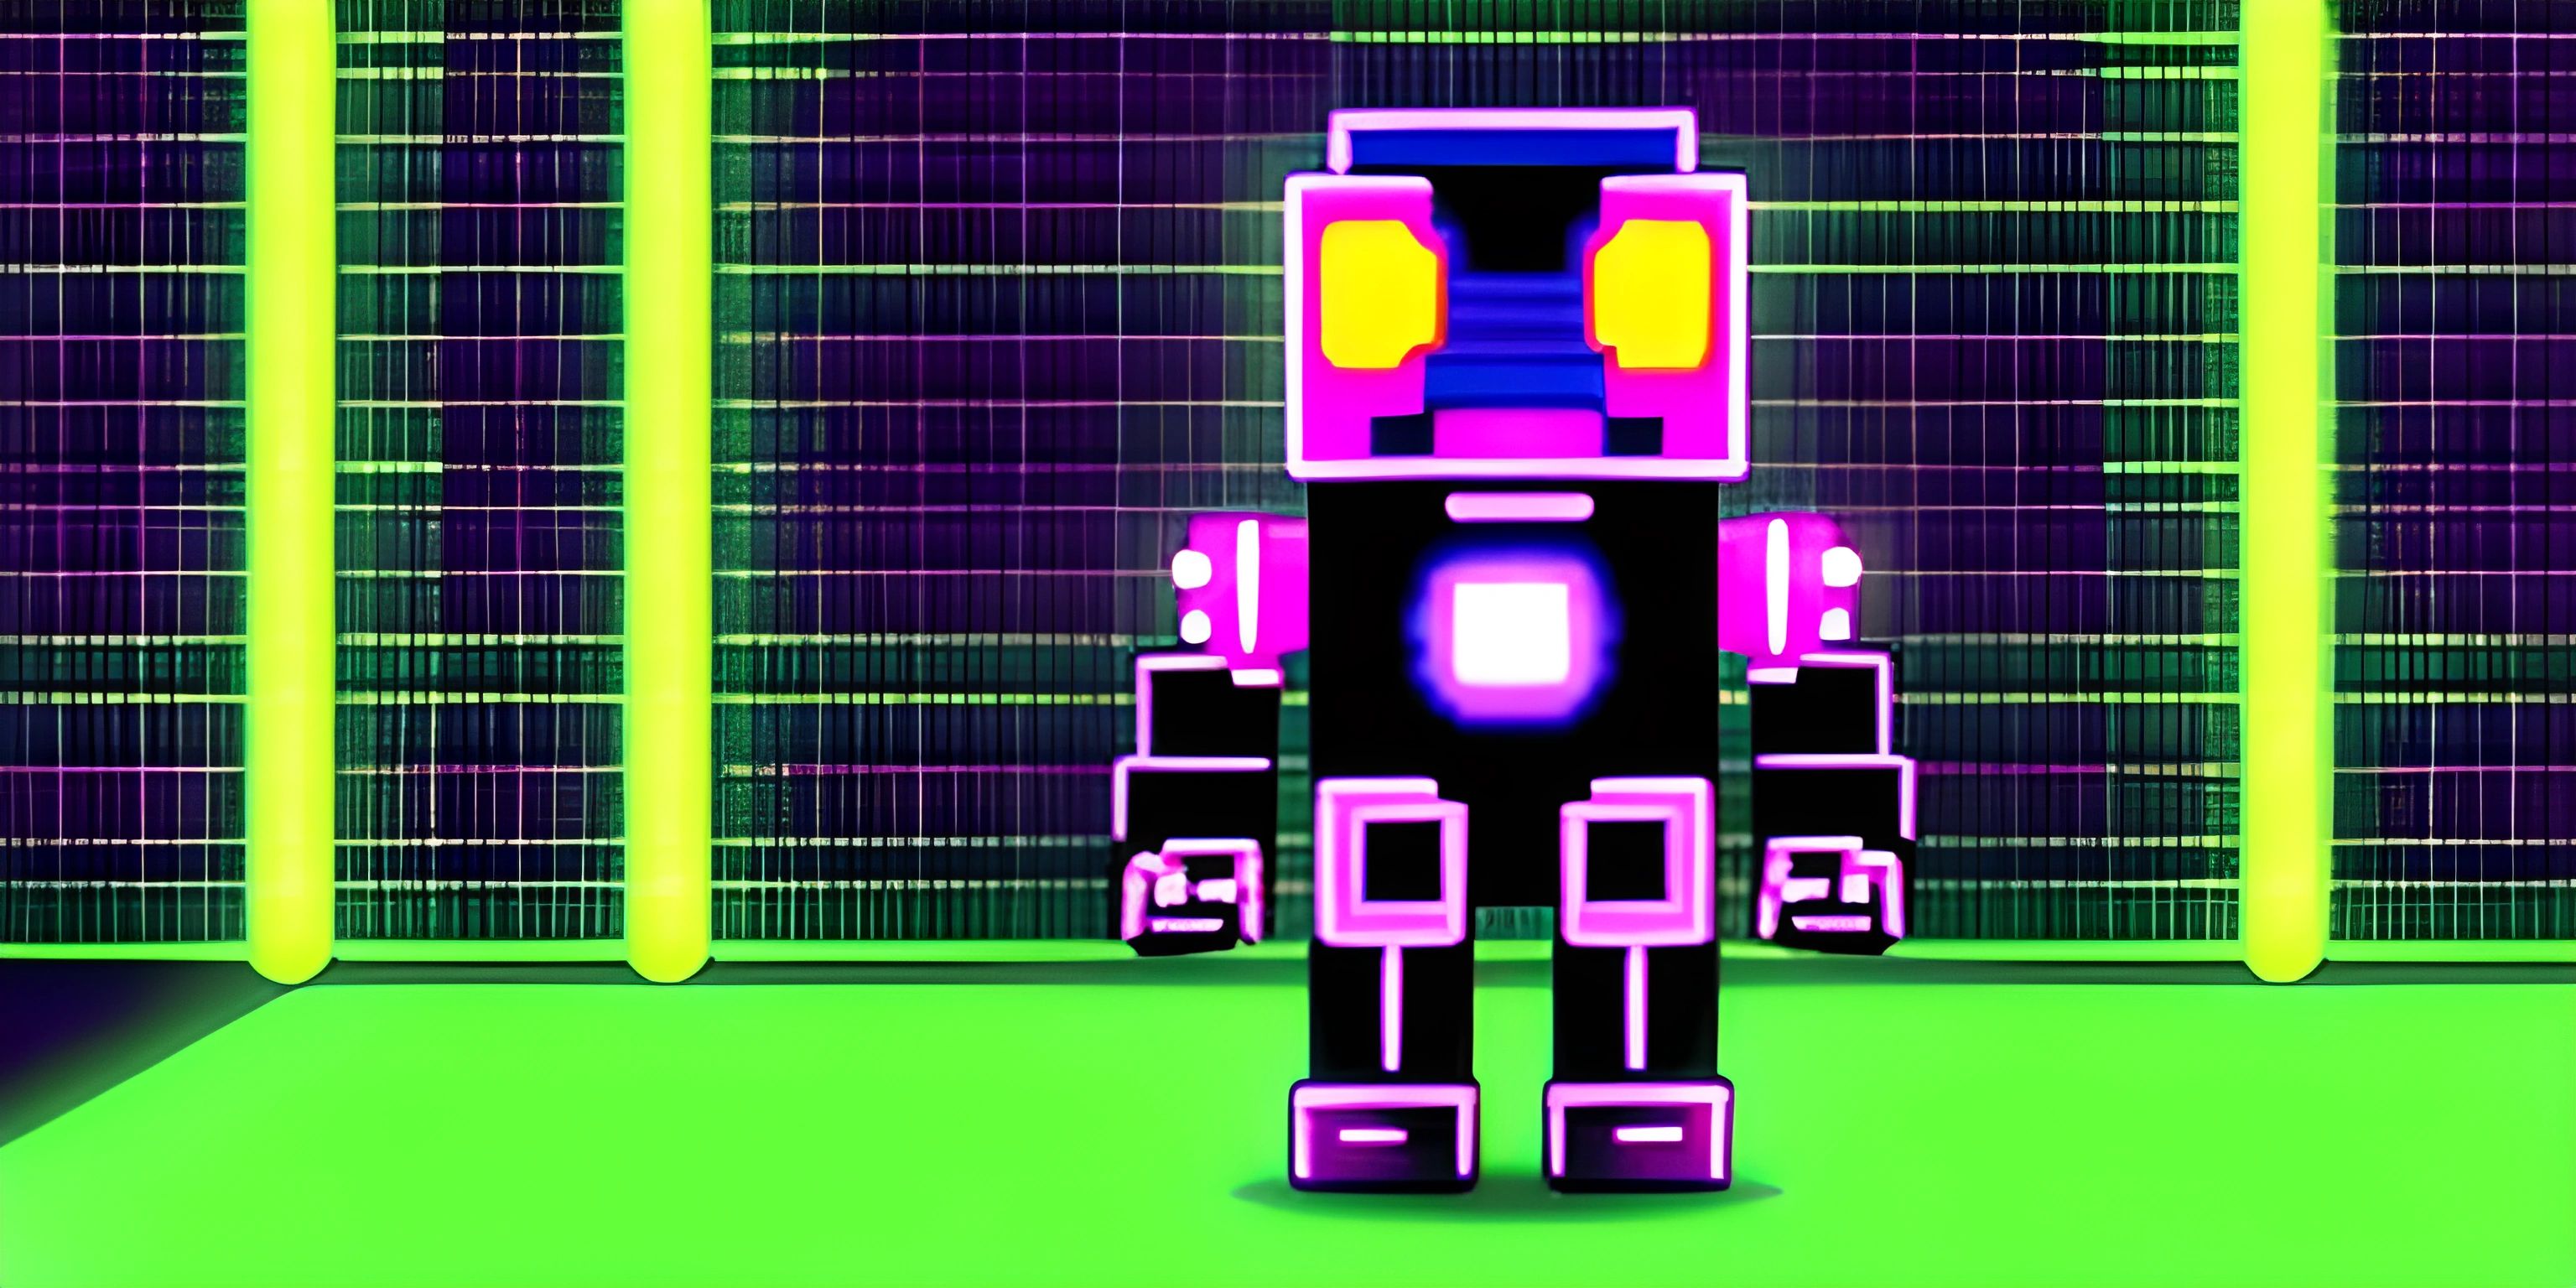 a small robot on a green floor with a fence in the background for an animated video game